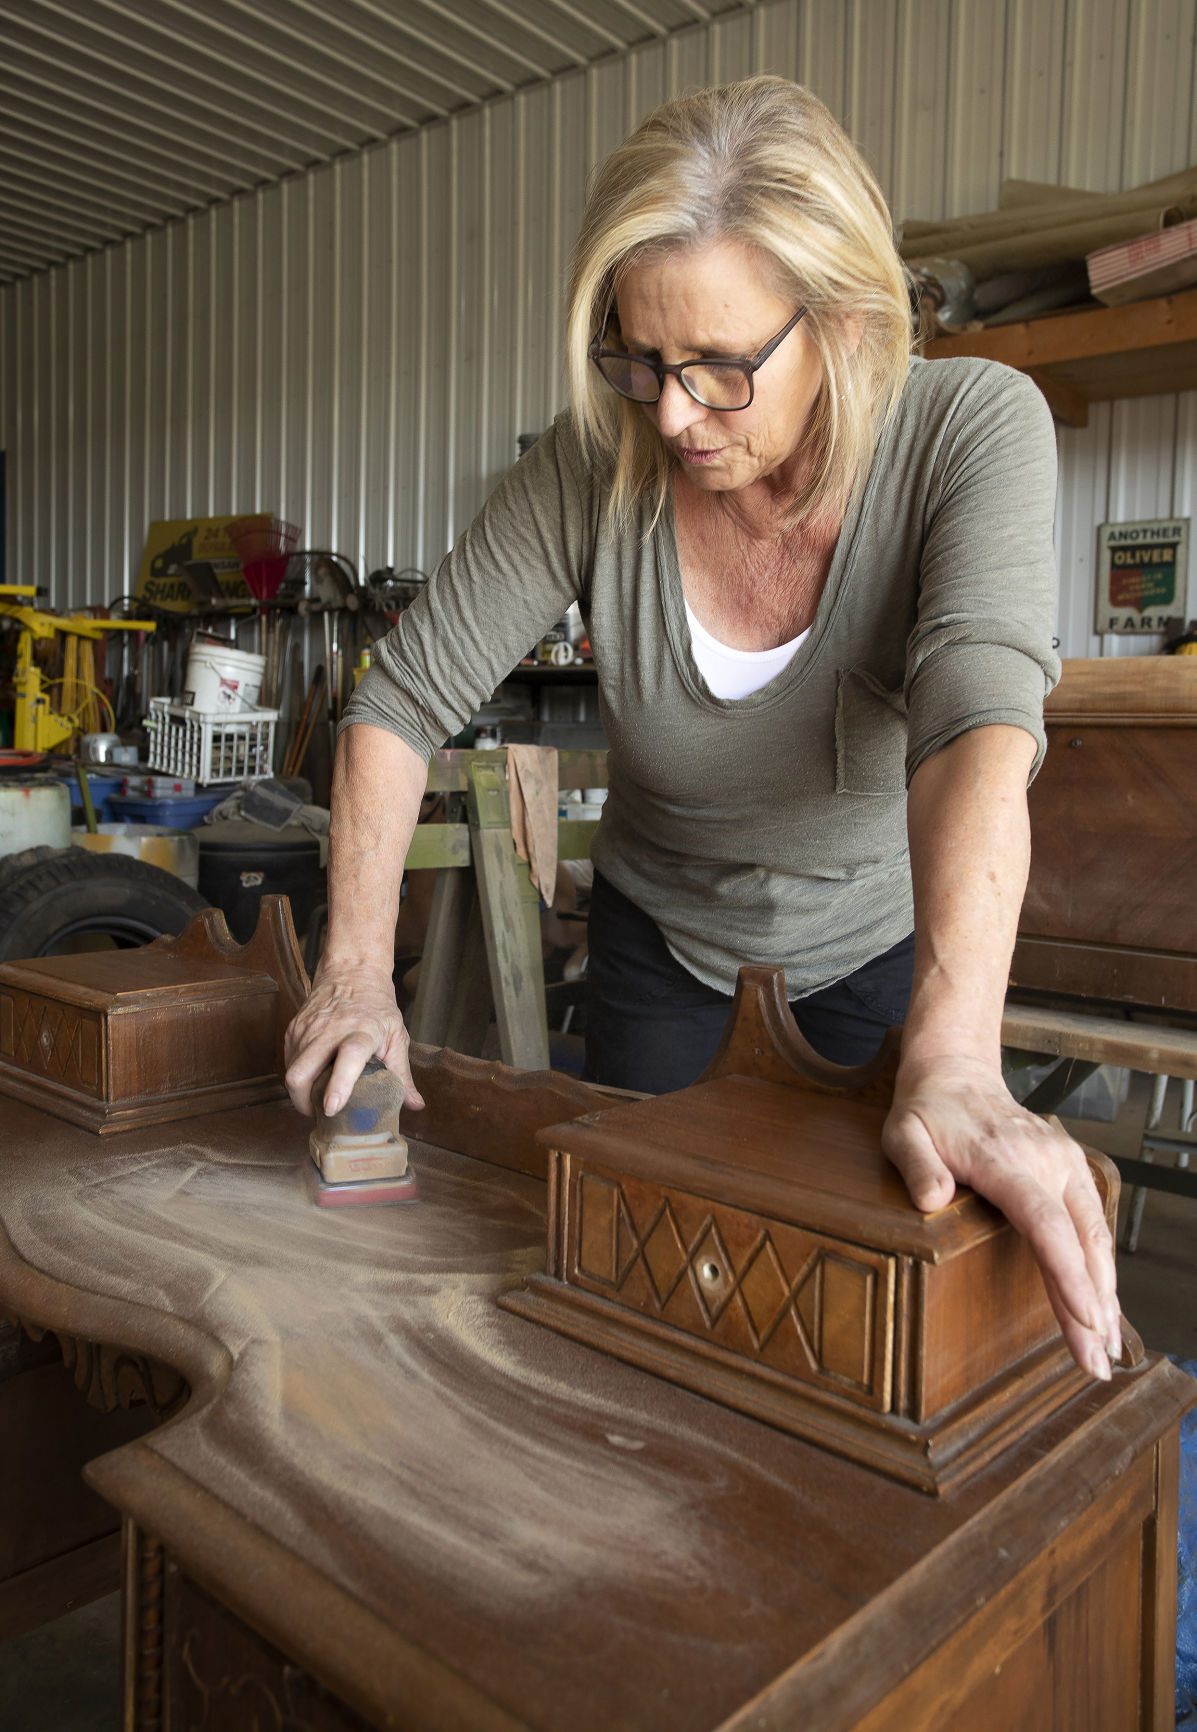 Dana Boltax sands a piece of furniture in her shop, located near Stitzer, Wis. Her business, Boltax Design Studio, creates a new look for furniture items.    PHOTO CREDIT: Stephen Gassman